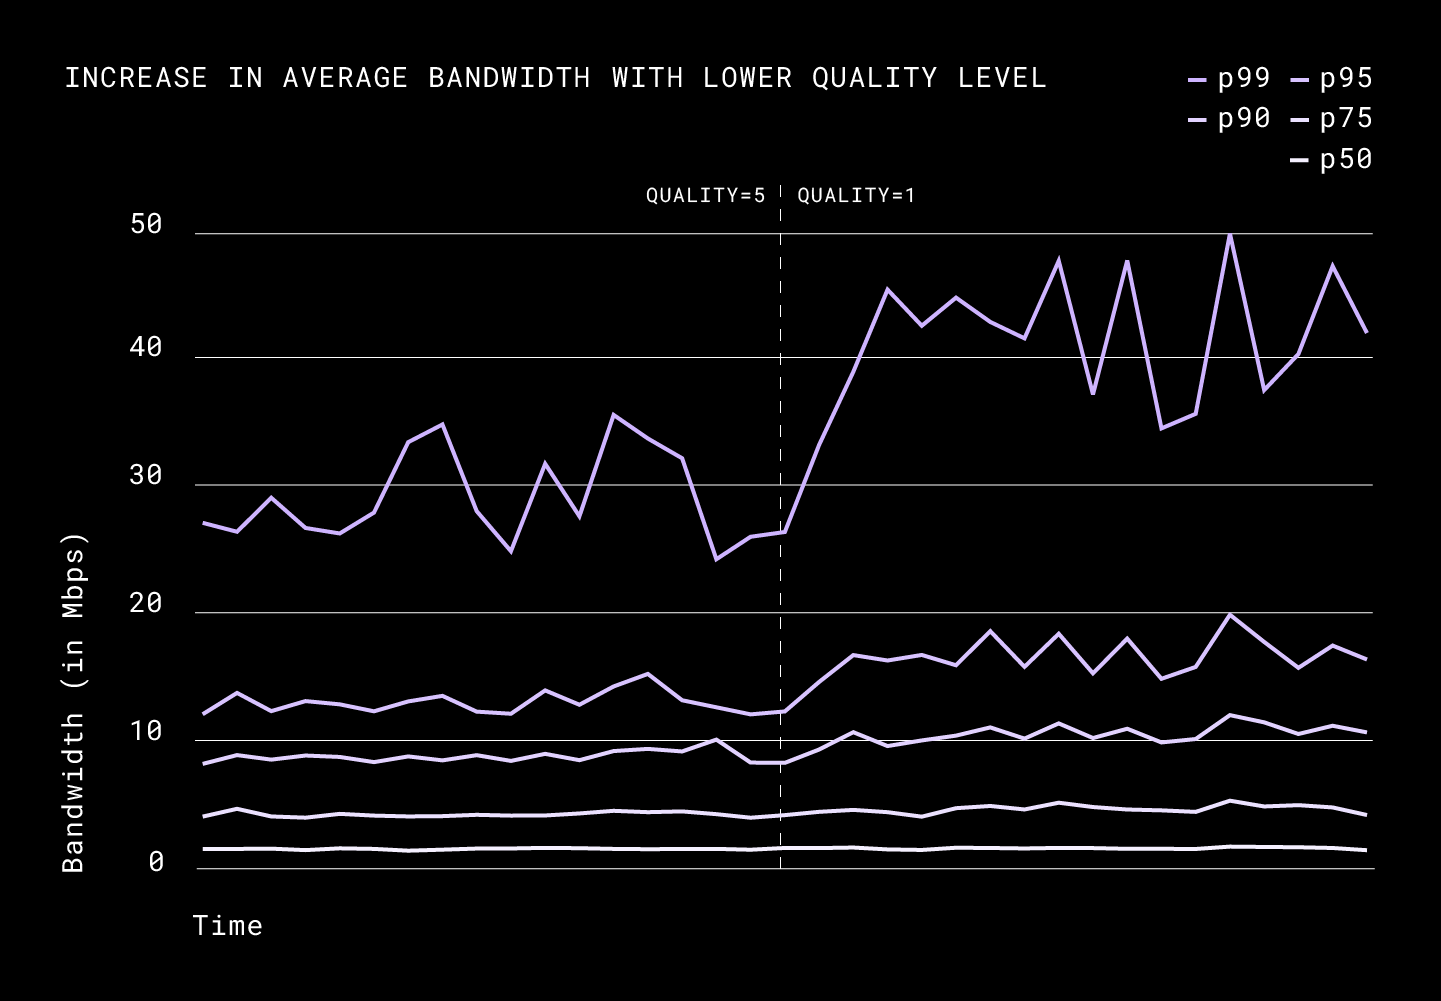 Increase in average bandwidth with lower quality level